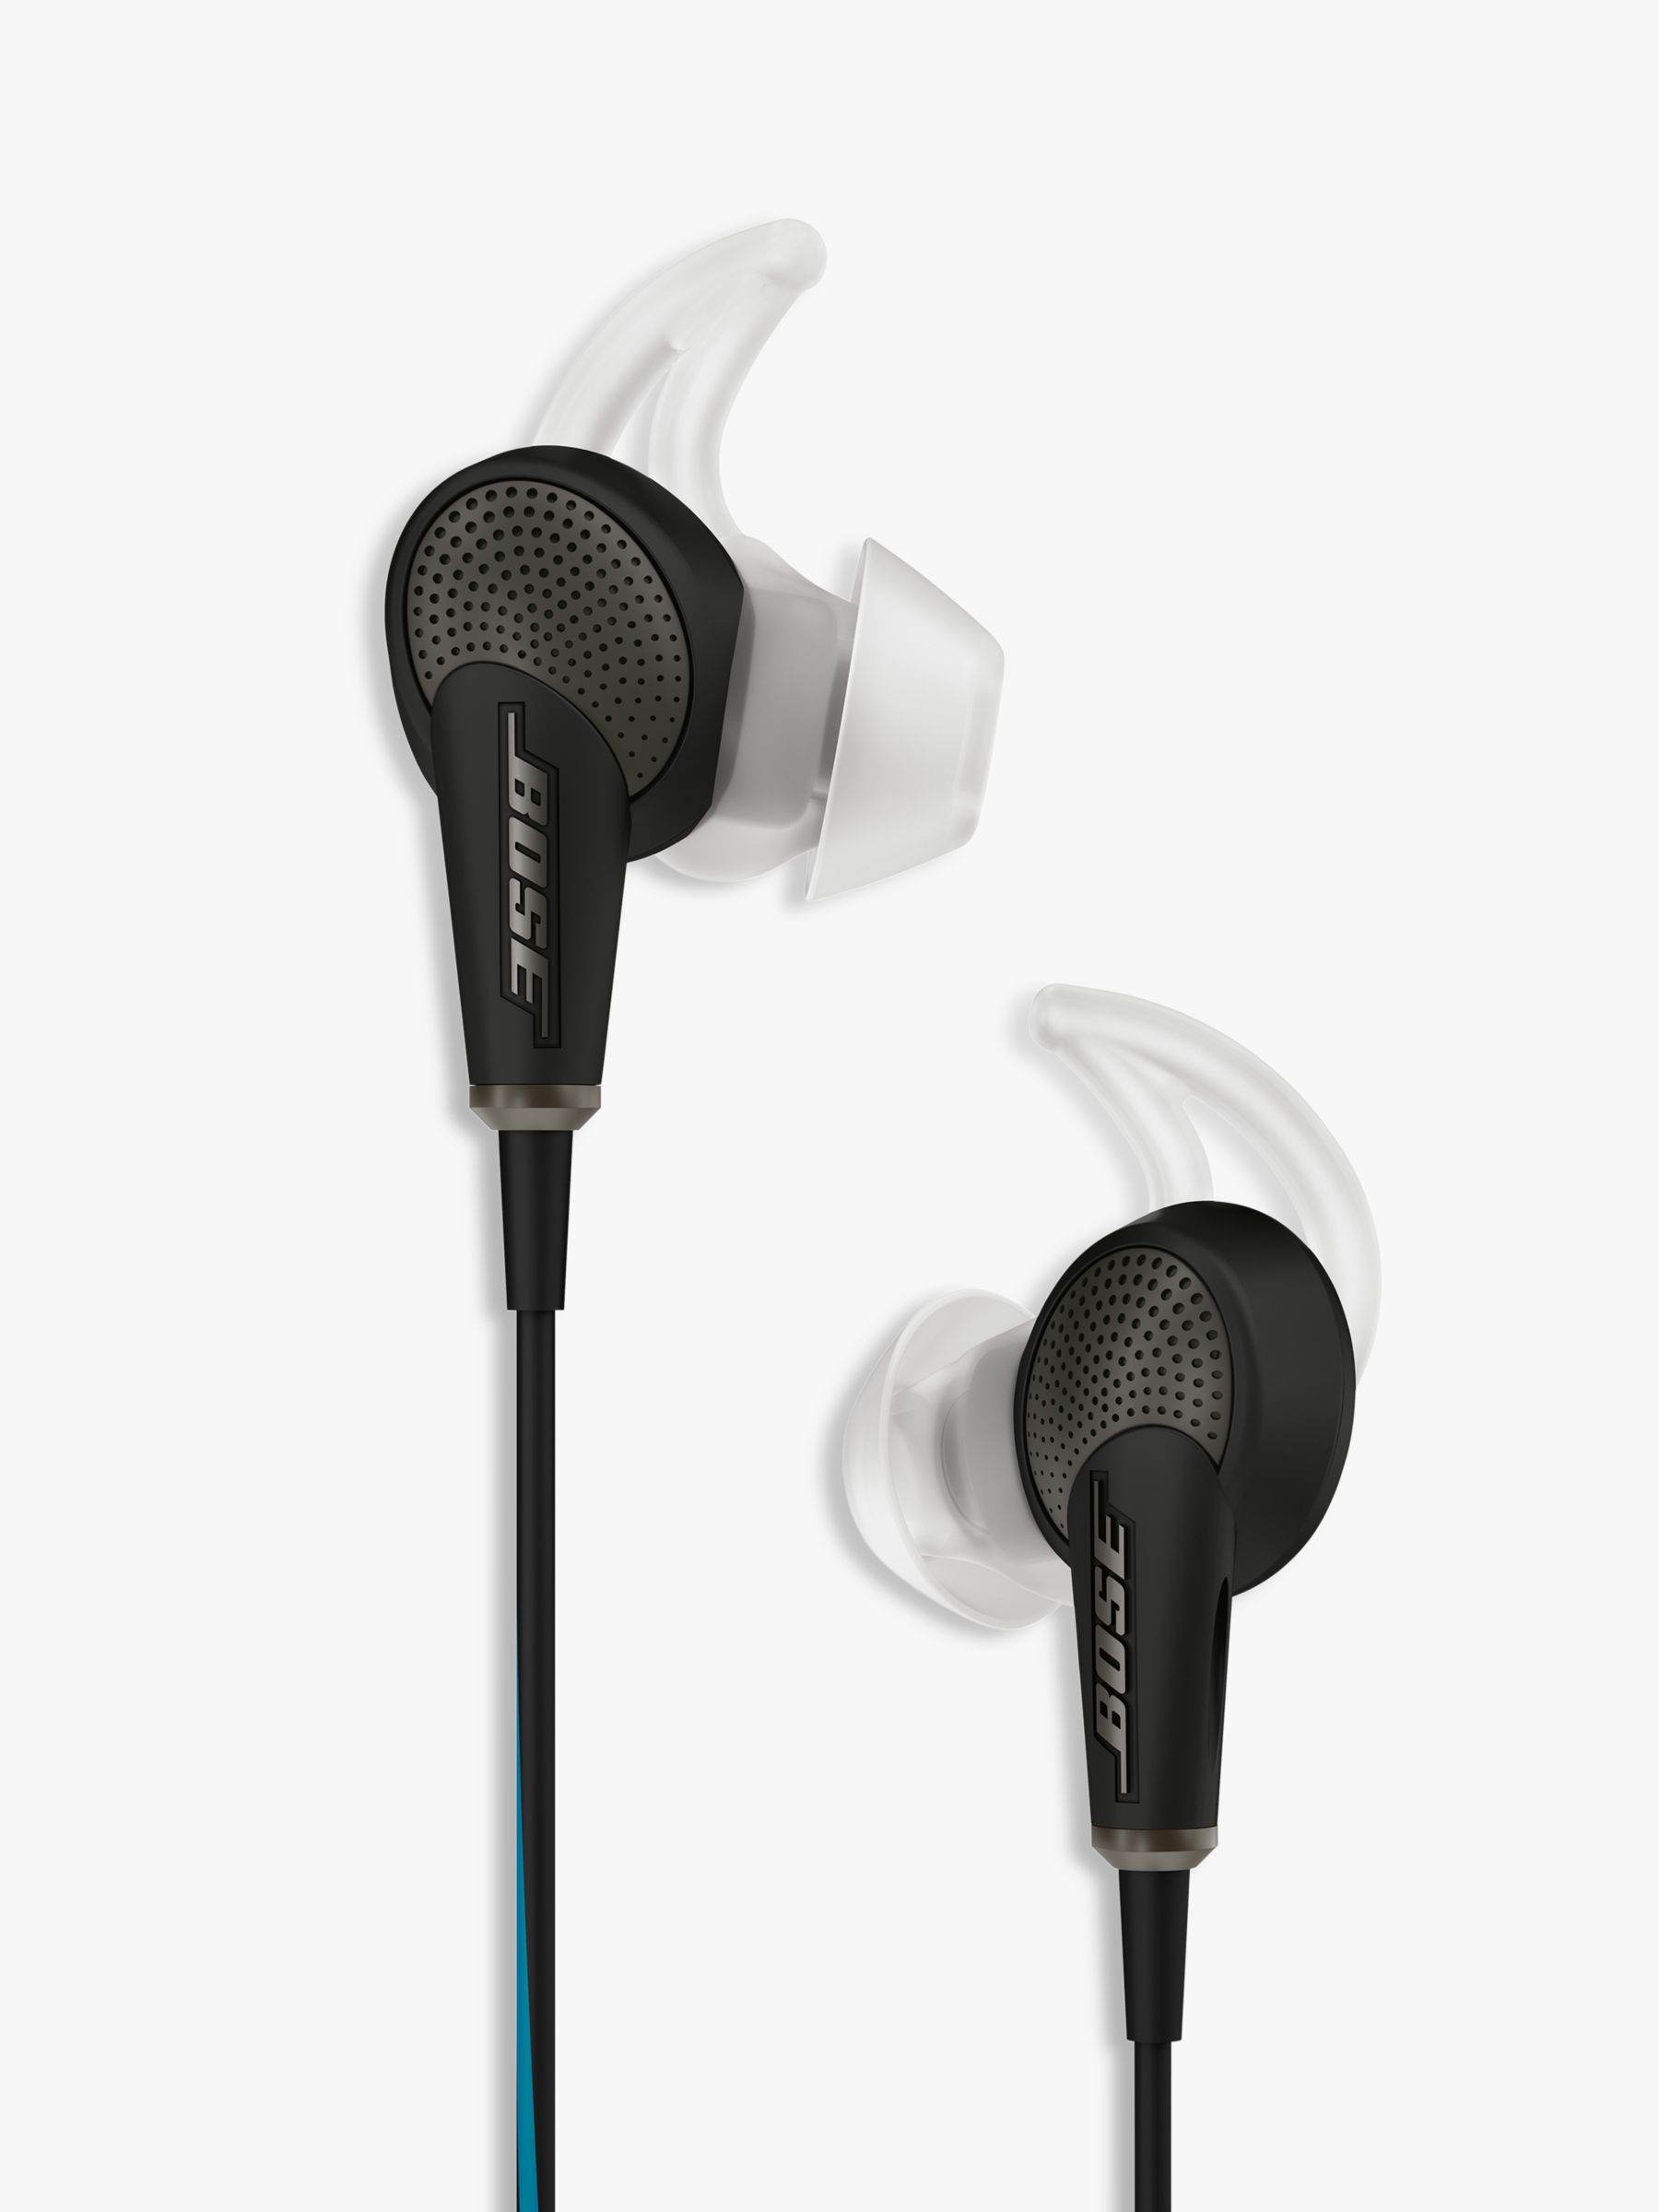 Bose QuietComfort Noise QC20 Acoustic In-Ear Headphones for iPhone and Black